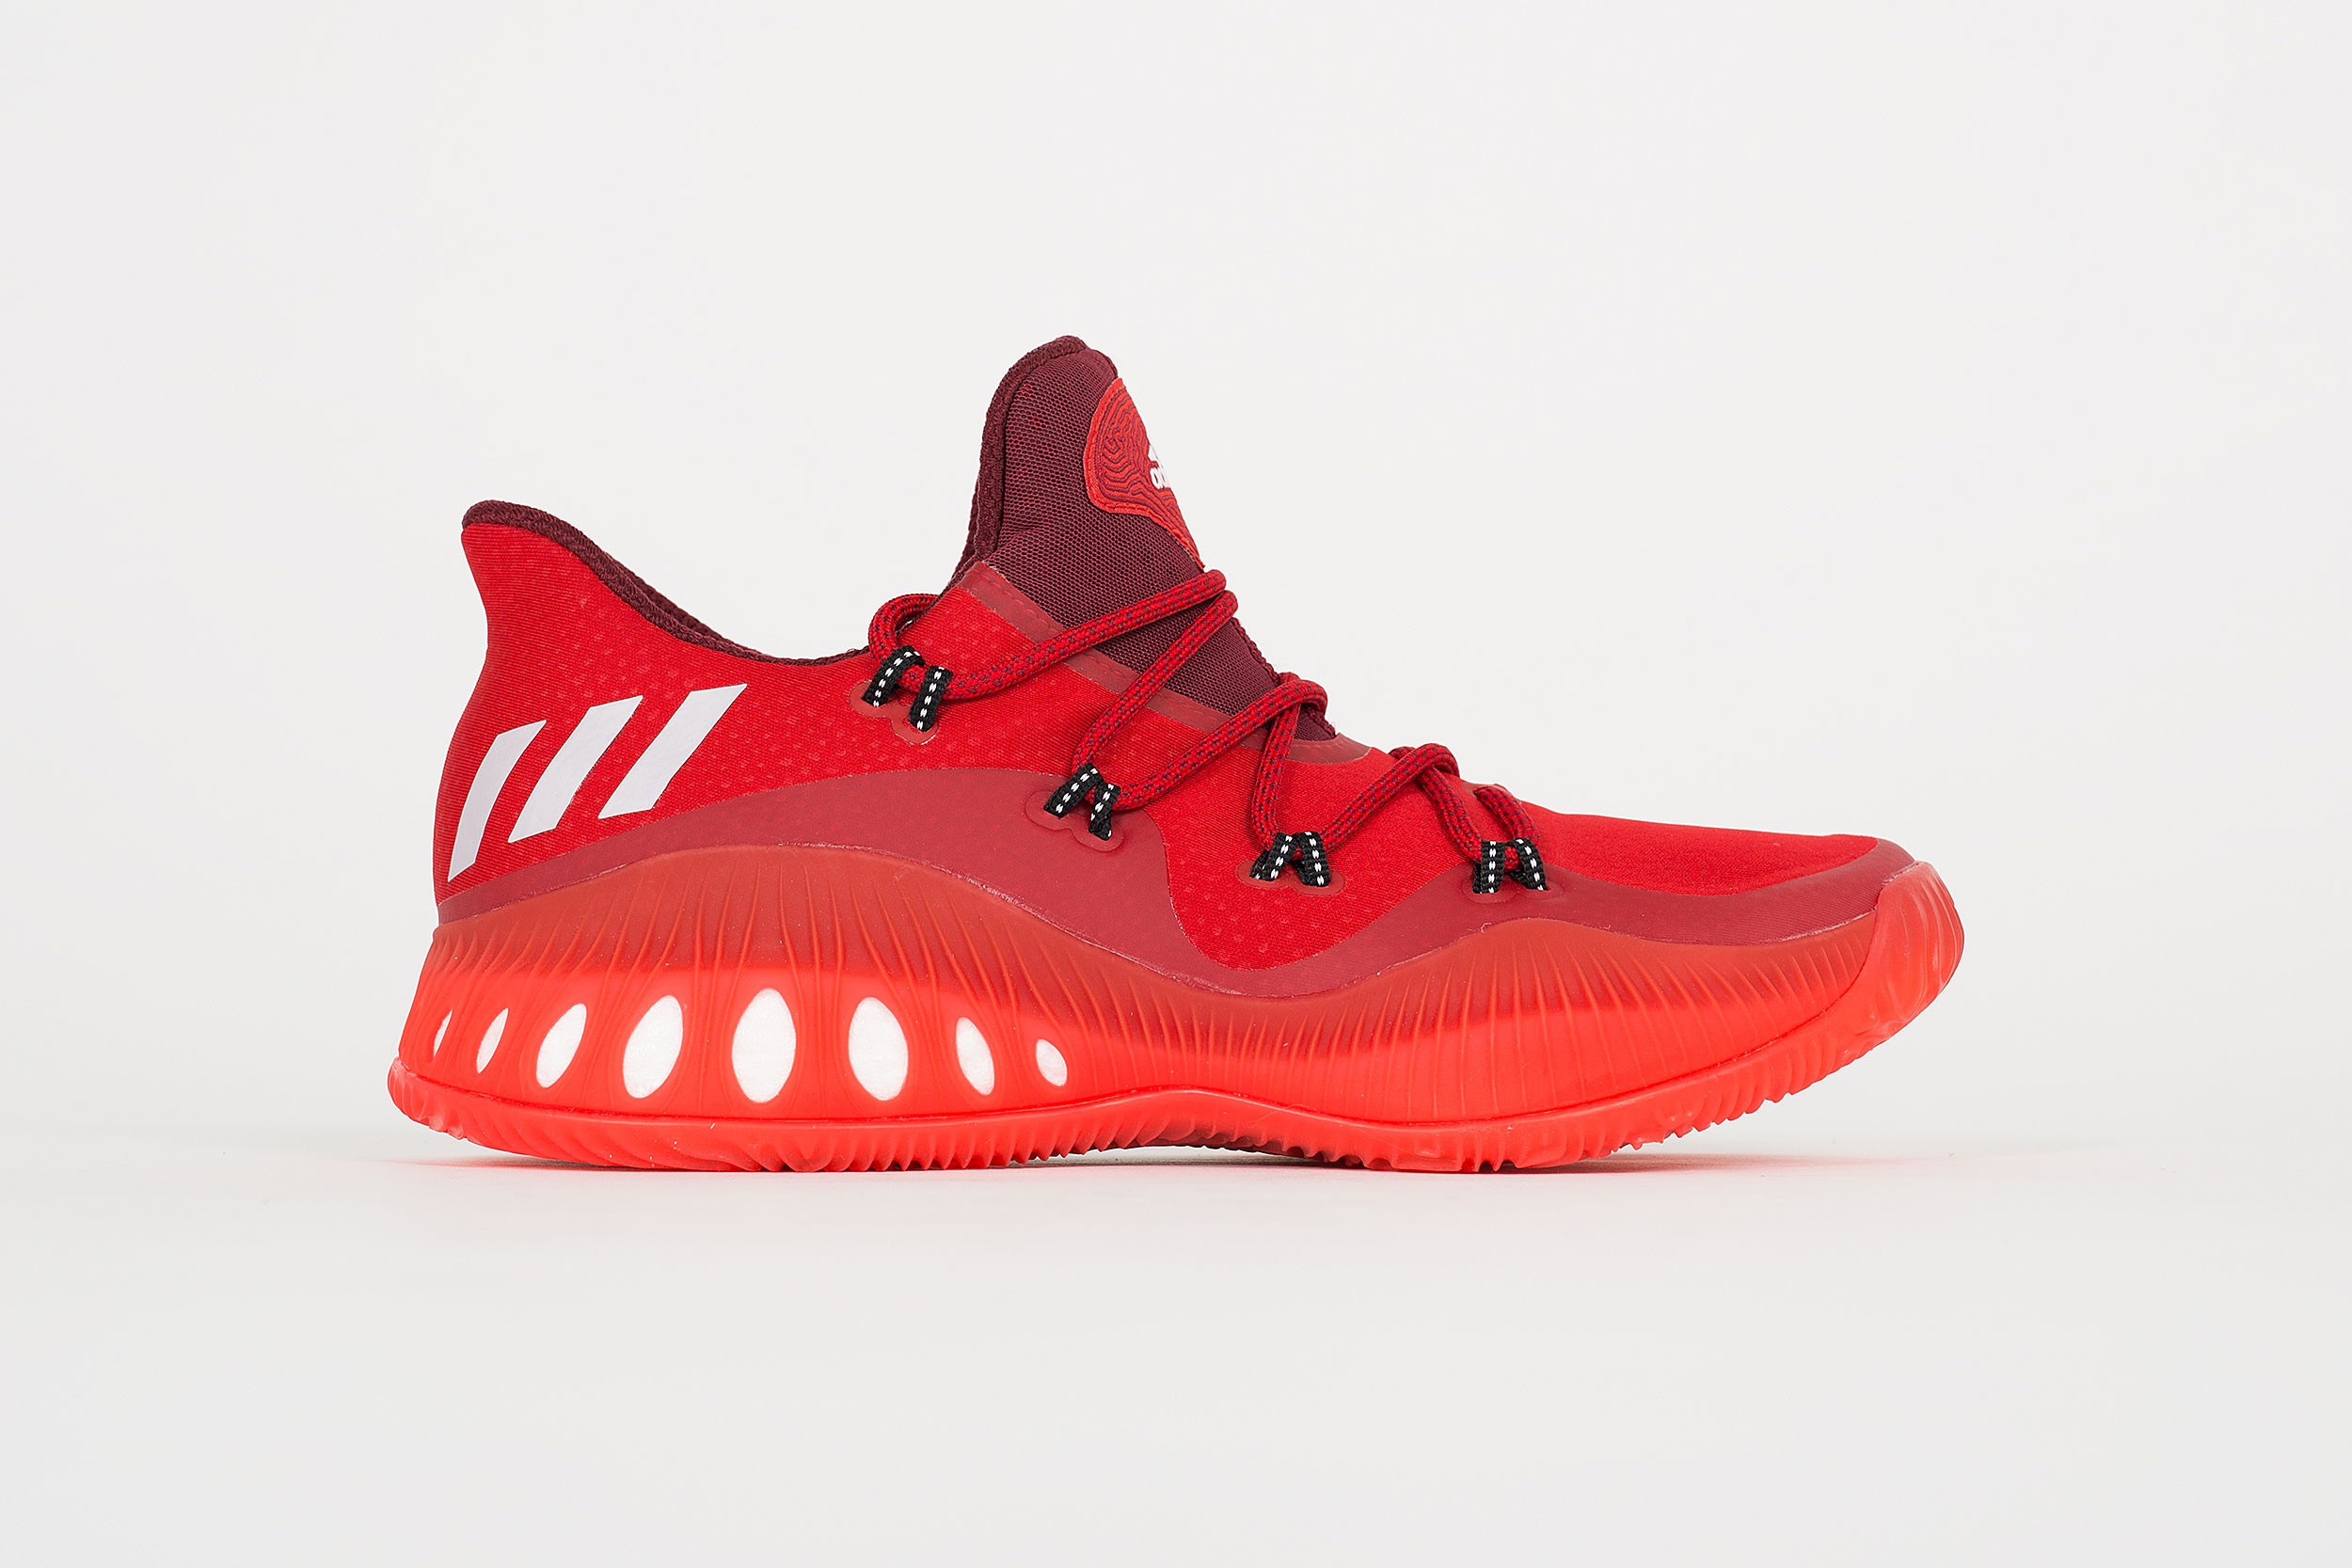 The adidas Crazy Explosive Low in 